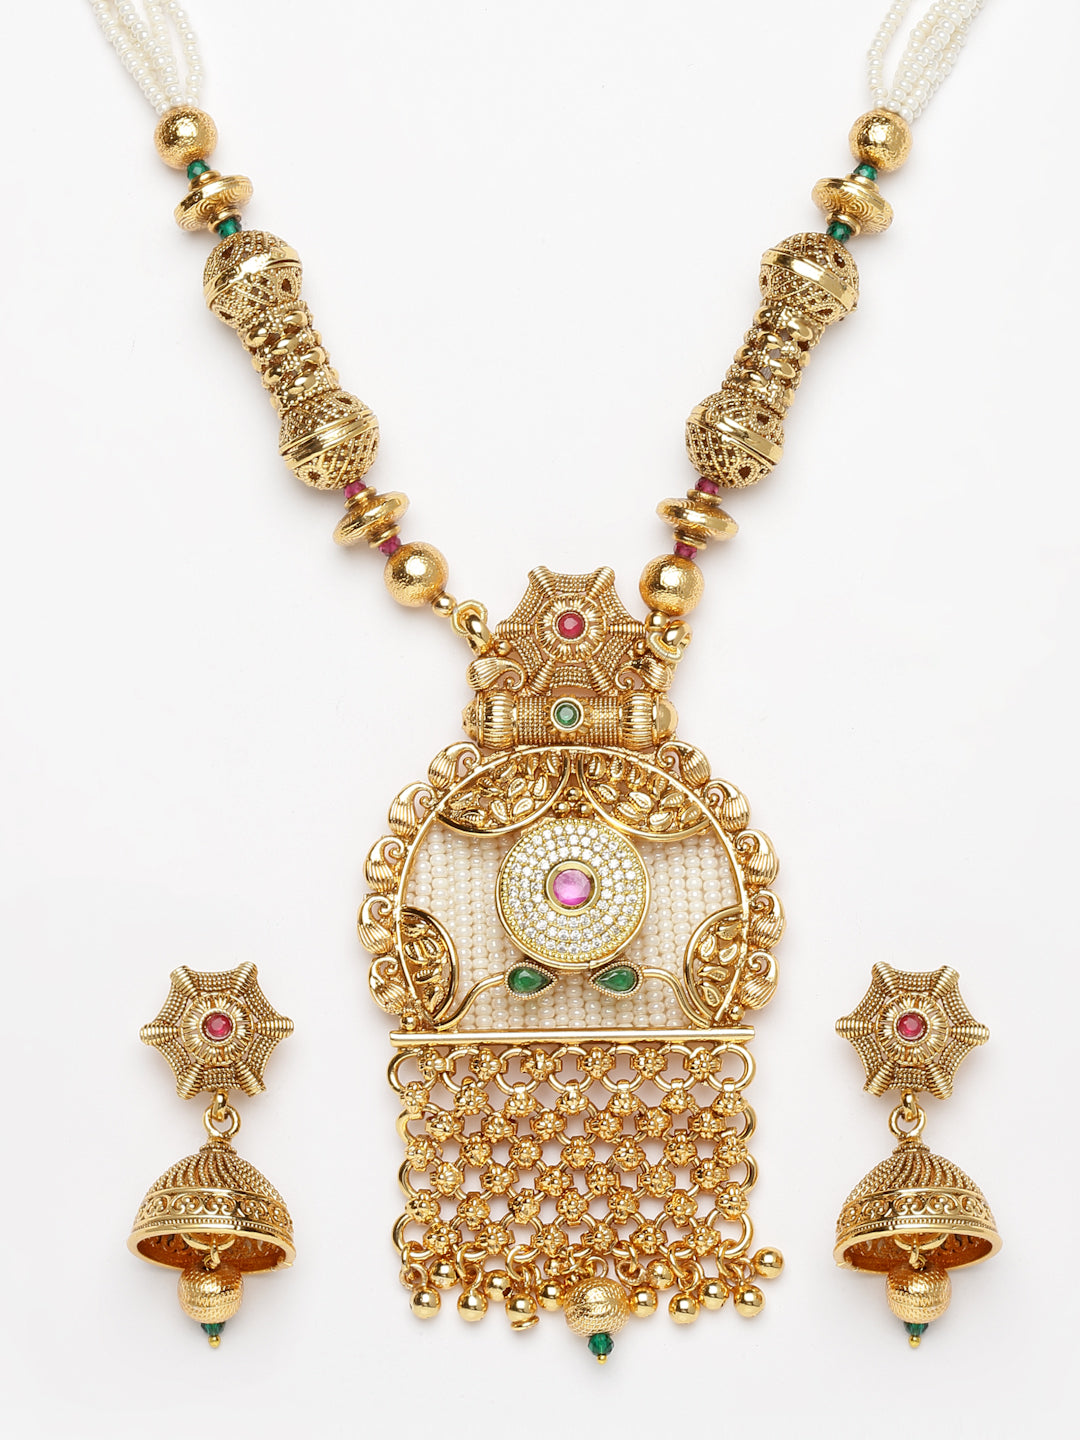 Arrabi Gold Handcrafted Jewellery Set with 2 Earrings (56 cm)